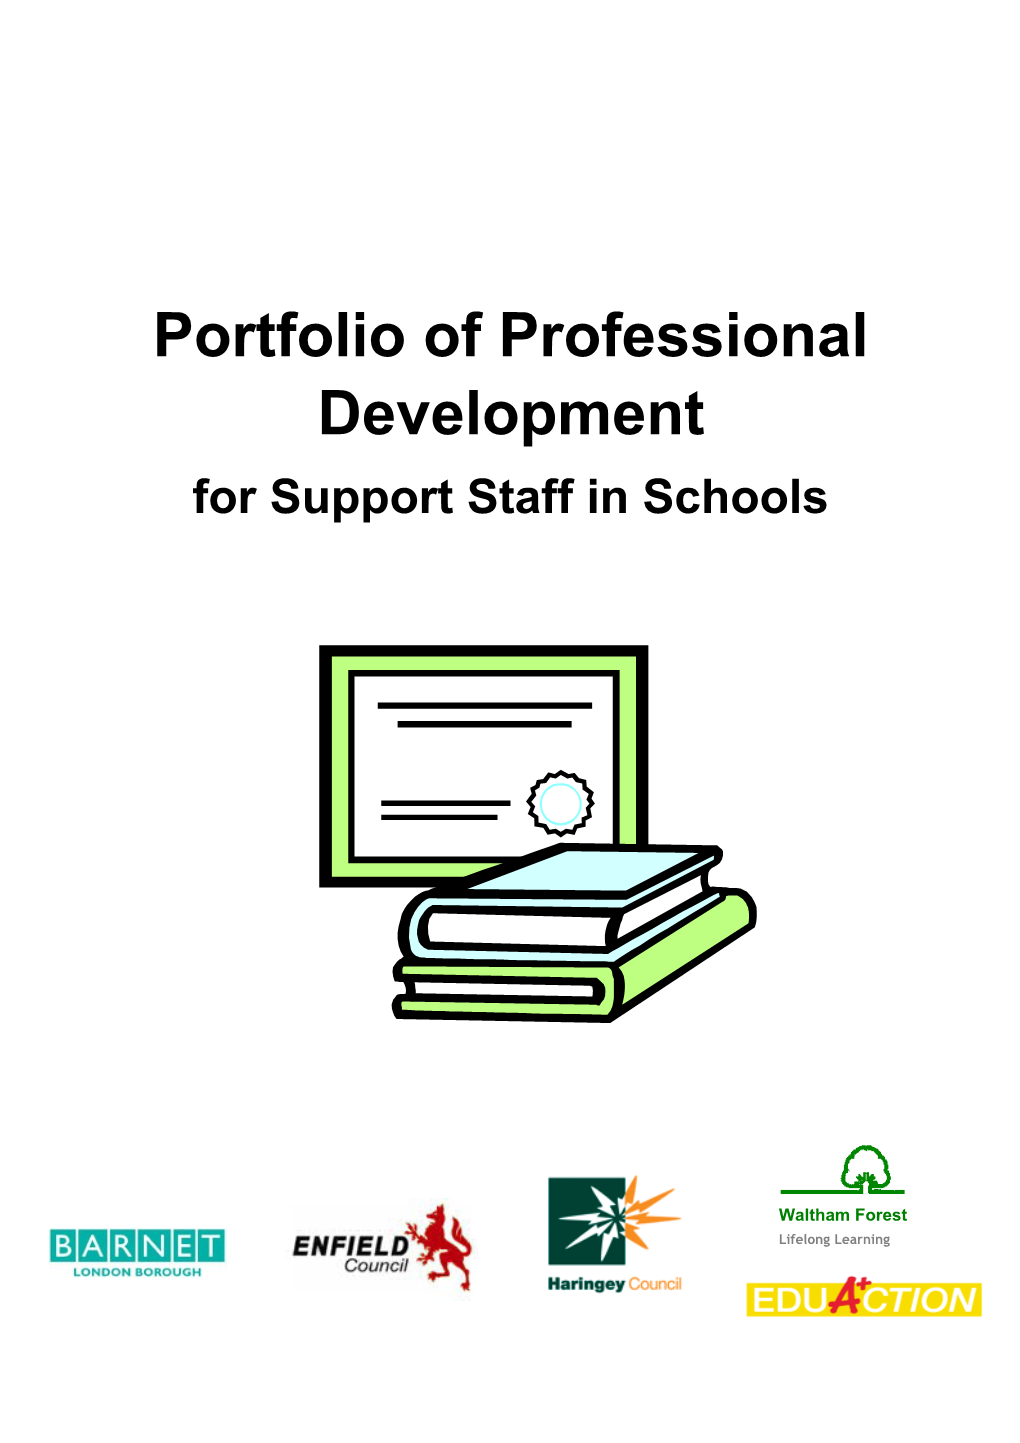 For Support Staff in Schools